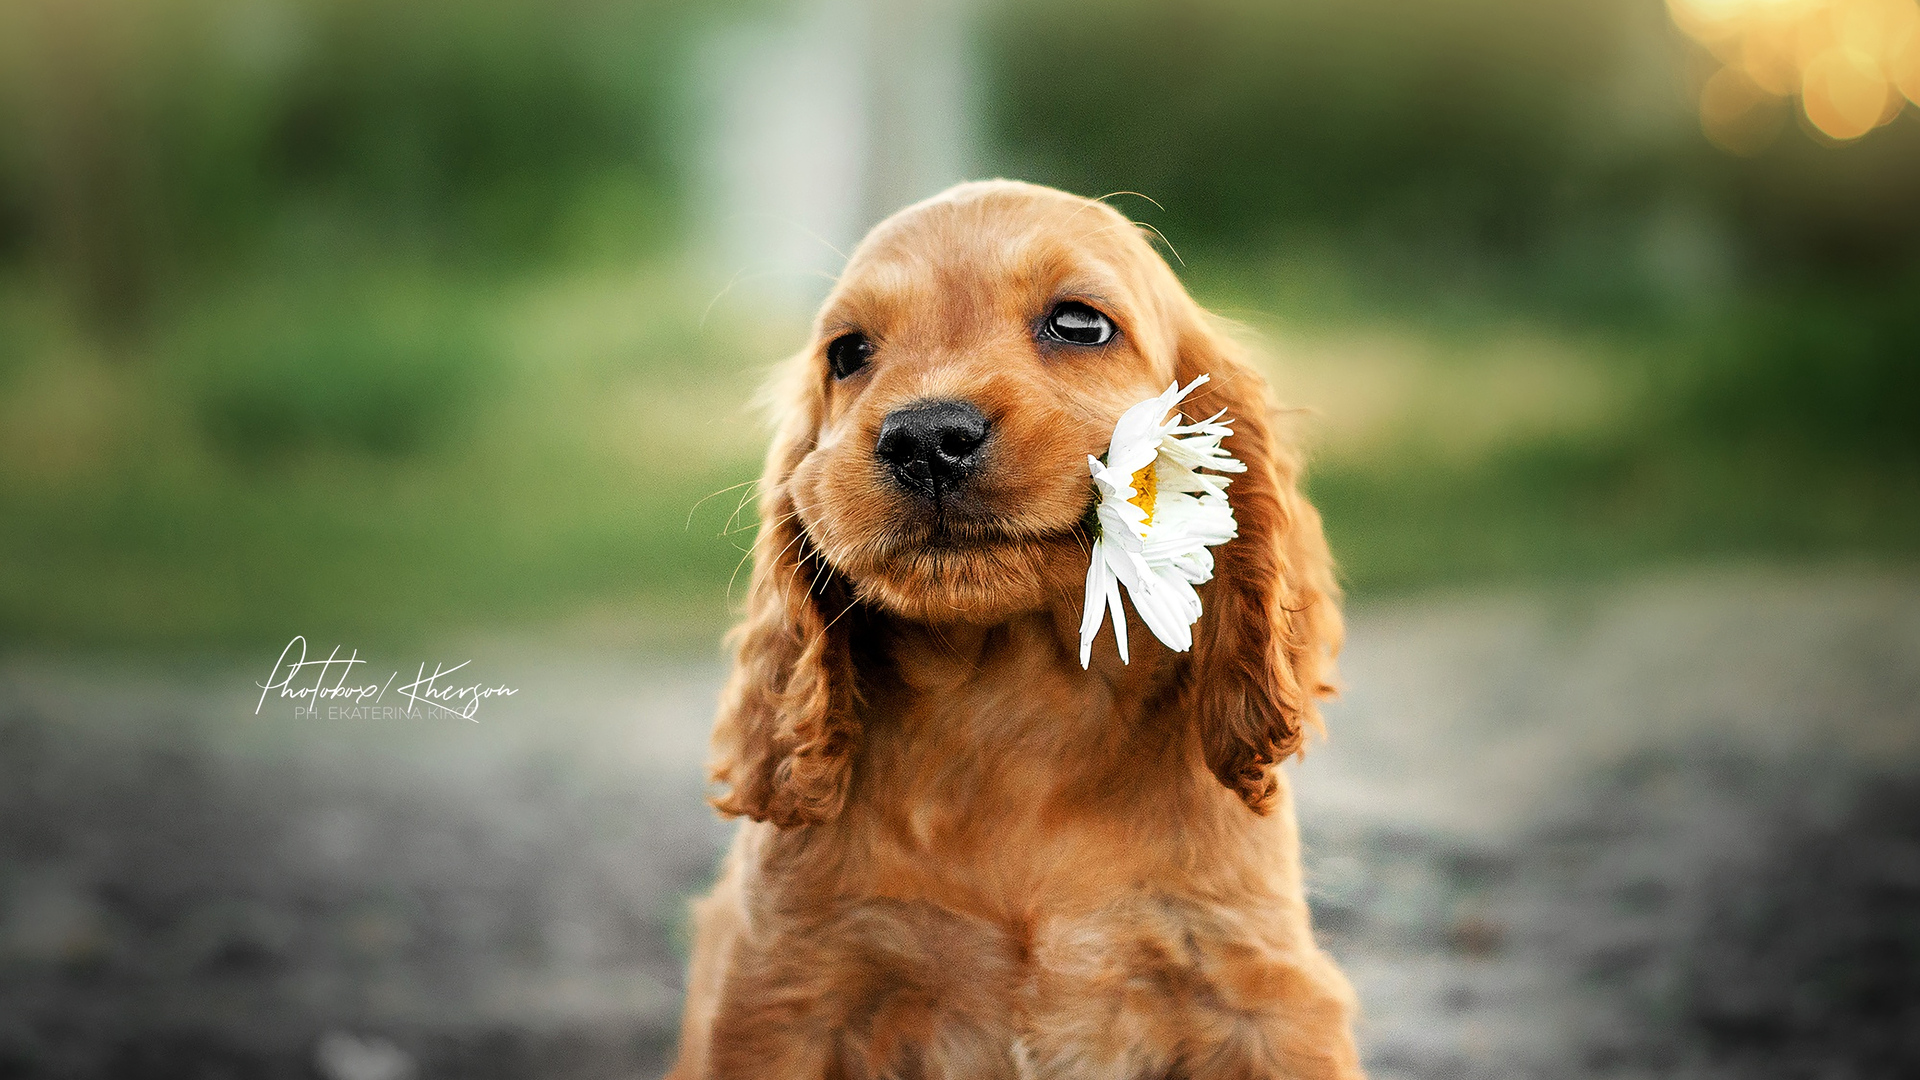 X dog with flower in mouth laptop full hd p hd k wallpapers images backgrounds photos and pictures